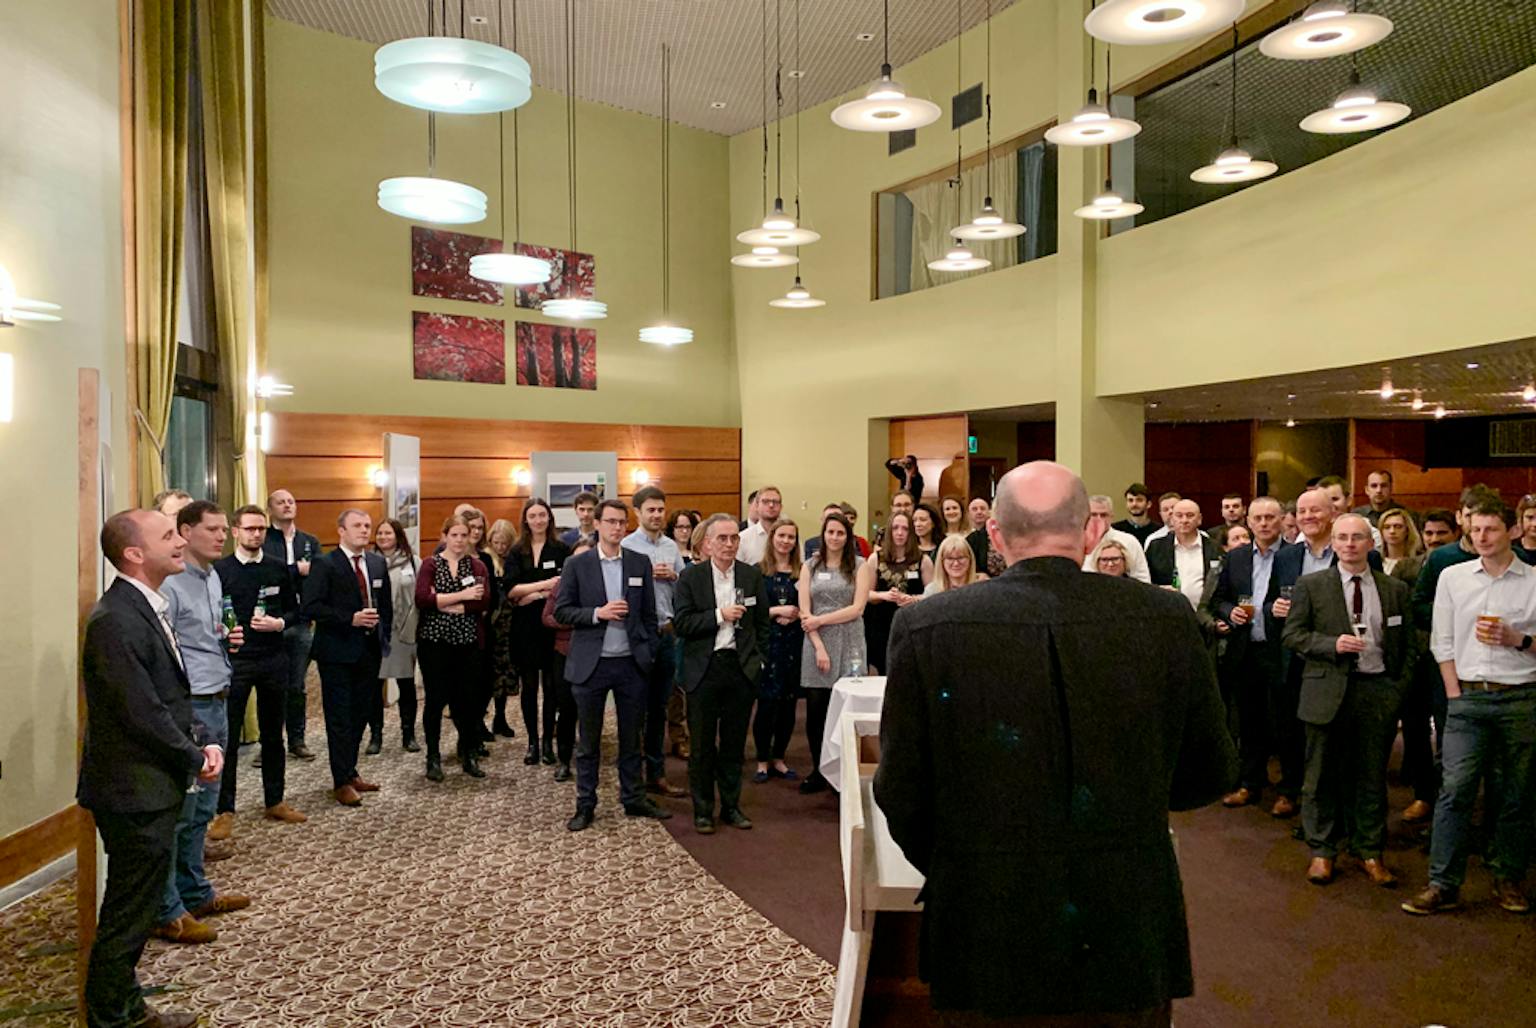 LUC celebrates 40 years in Scotland with drinks reception